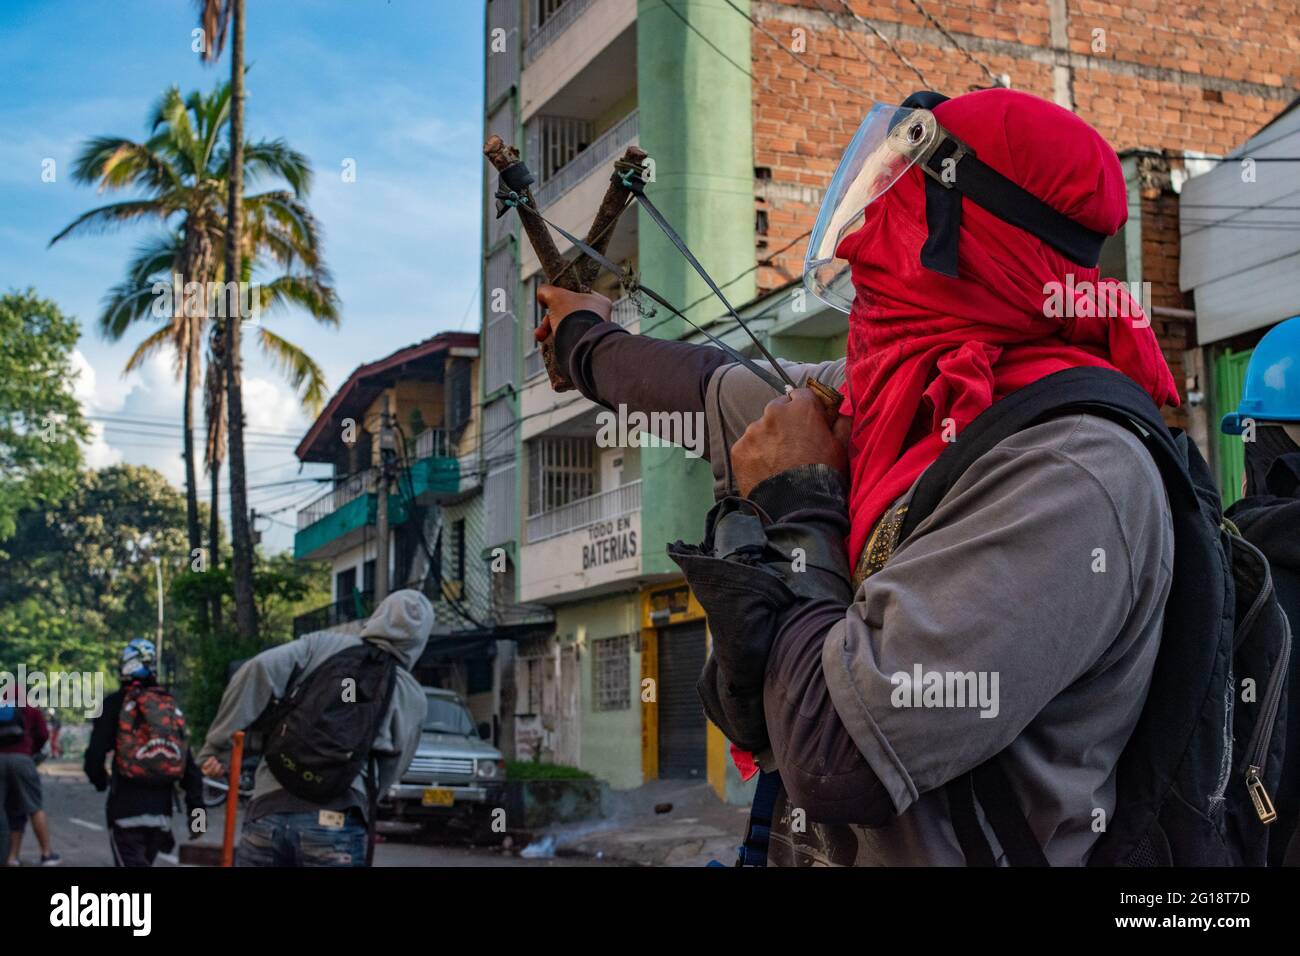 A demonstrator uses a slingshot as clashes between demonstrators and Colombia's riot police (ESMAD) erupt in Medellín, Colombia after several weeks of anti-government protest against President Ivan Duque's tax and health reforms and unrest and abuse of authority cases that leave at least 70 dead according to NGOs on June 4, 2021. Stock Photo